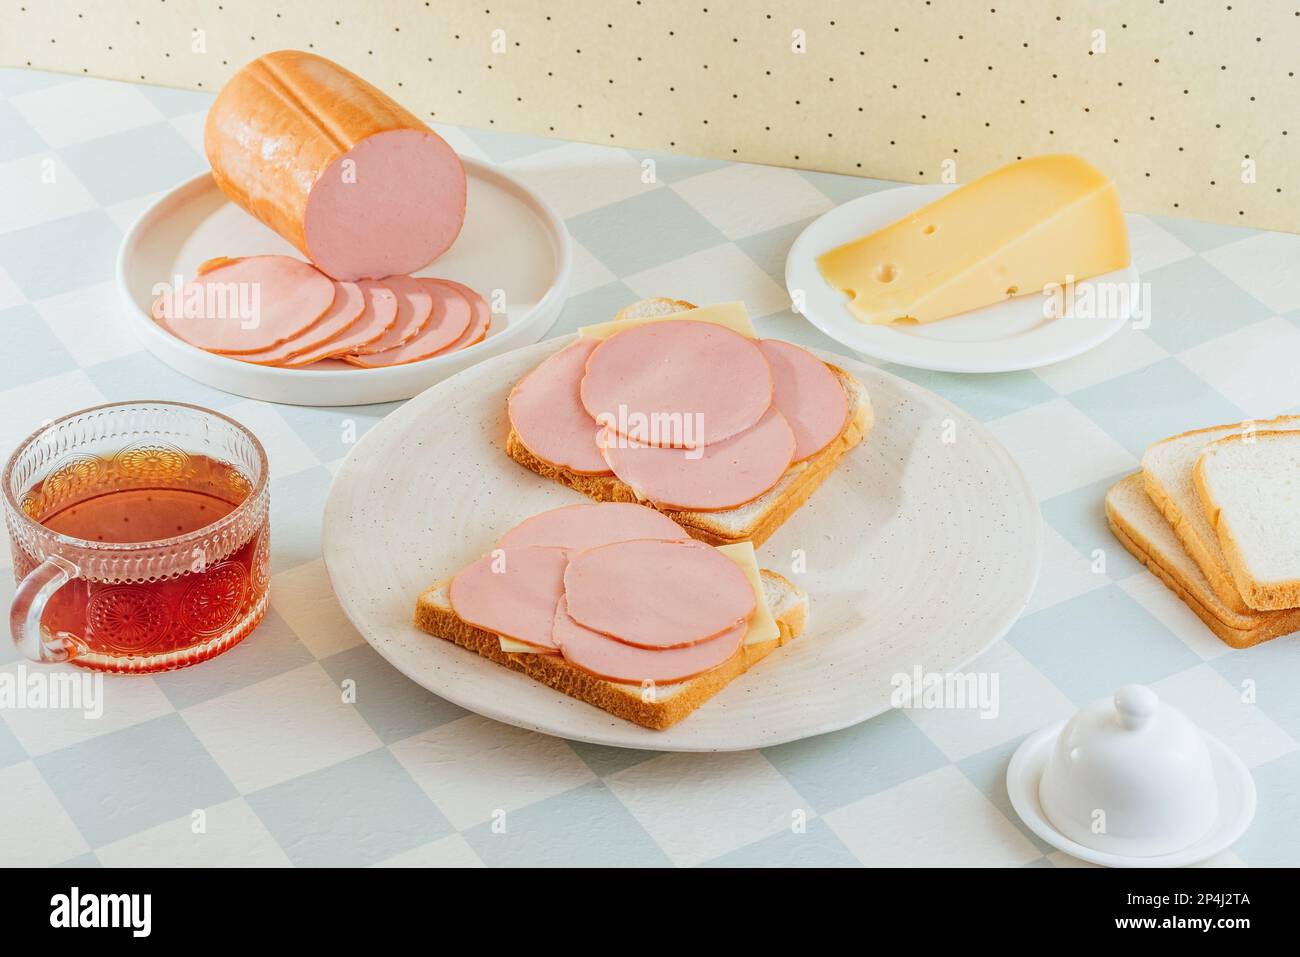 ham and cheese sandwich on a plate. ham is nearby. breakfast. Stock Photo